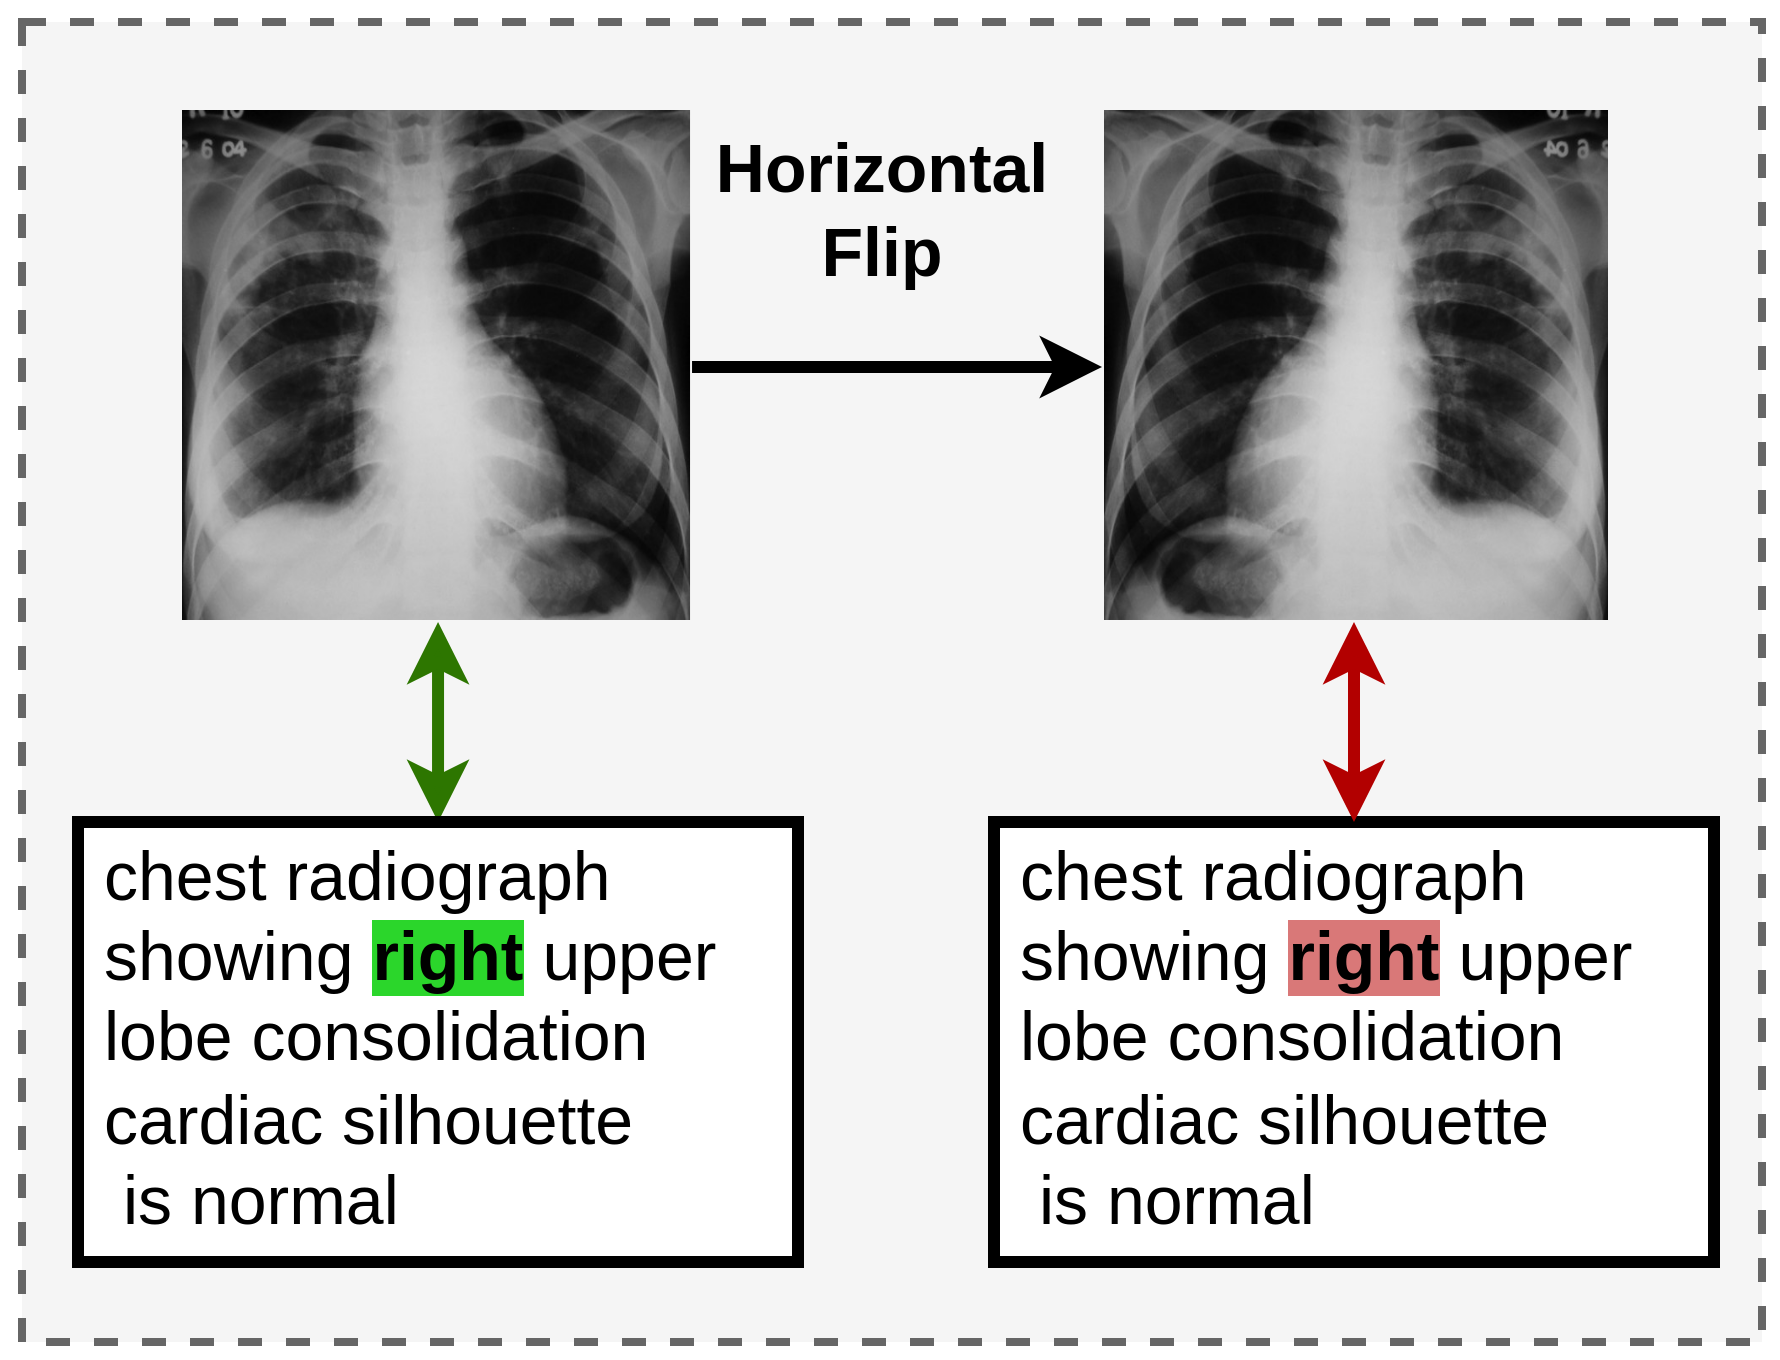 Foreign objects in chest X-rays